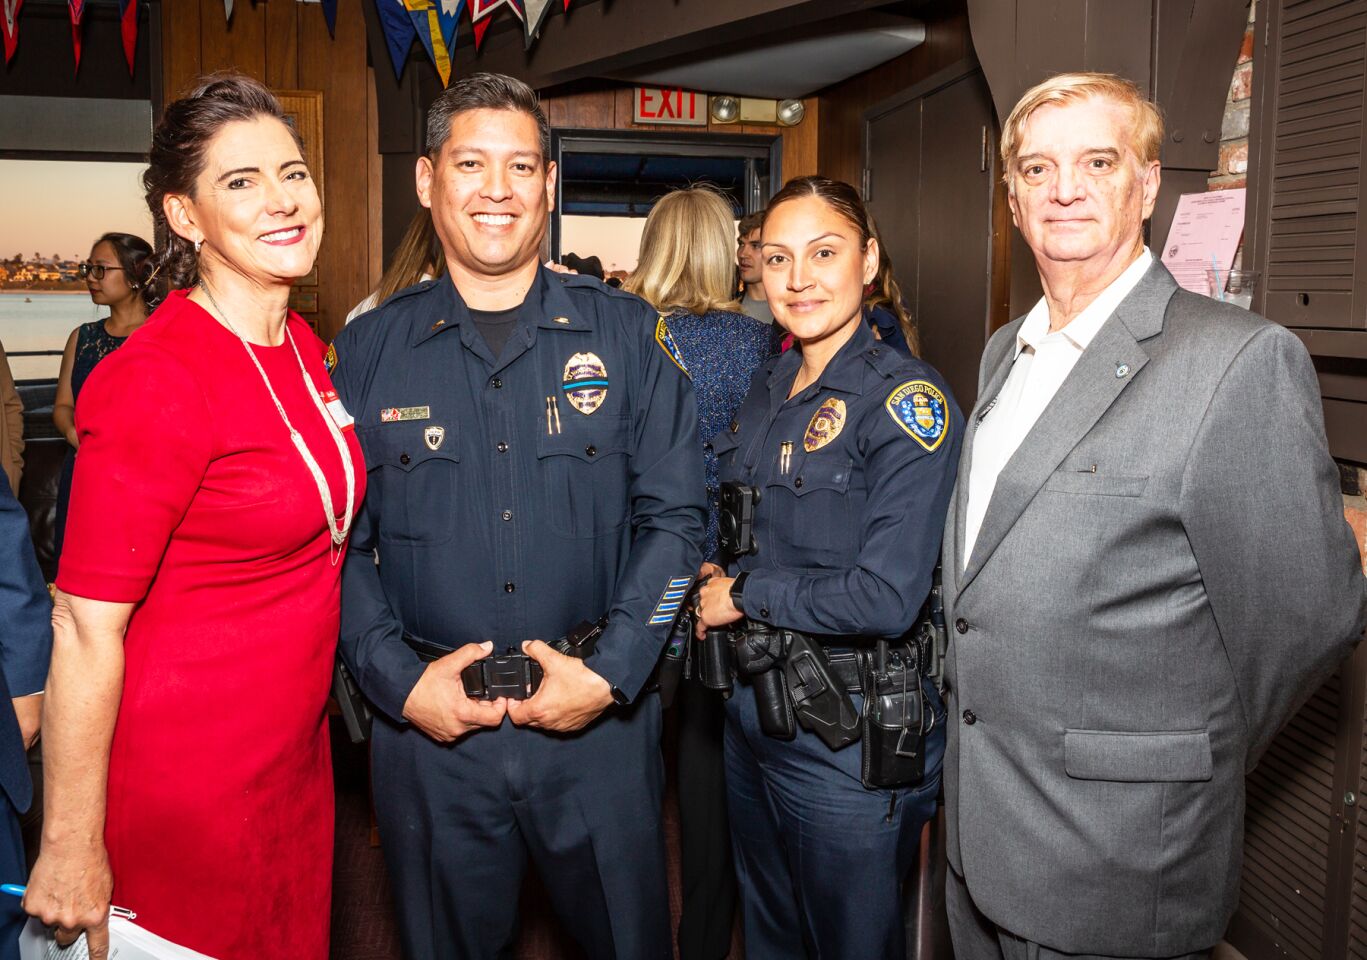 PB Town Council President Marcella Bothwell with San Diego Police Lt. Rick Aguilar and Officer Jessica Thrift and PBTC Recording Secretary Greg Daunoras.